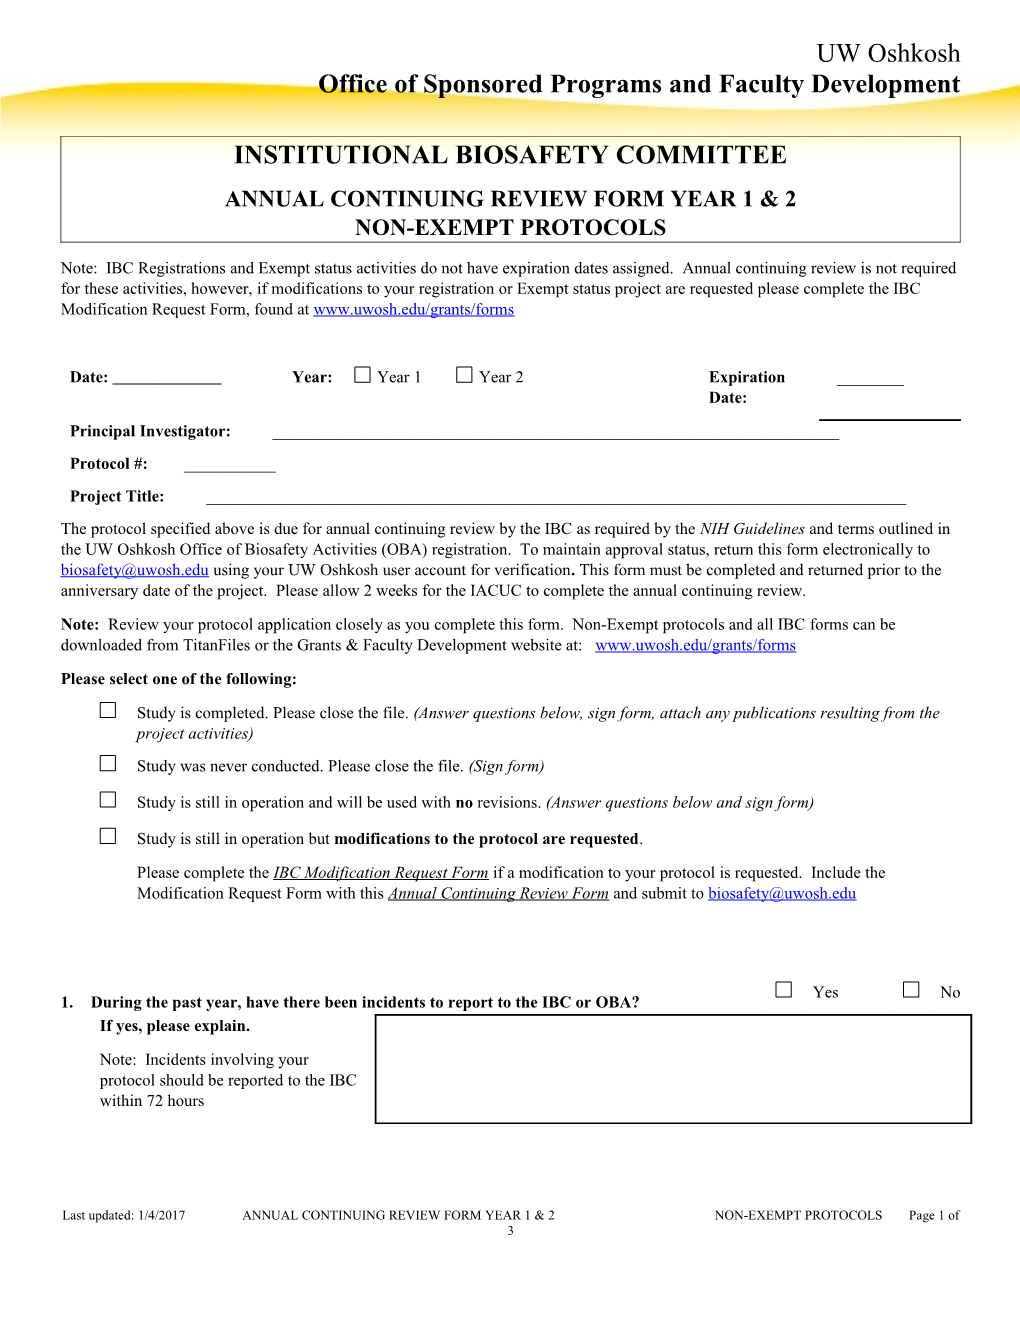 Annual Continuing Review Form Year 1 & 2 Non-Exempt Protocols